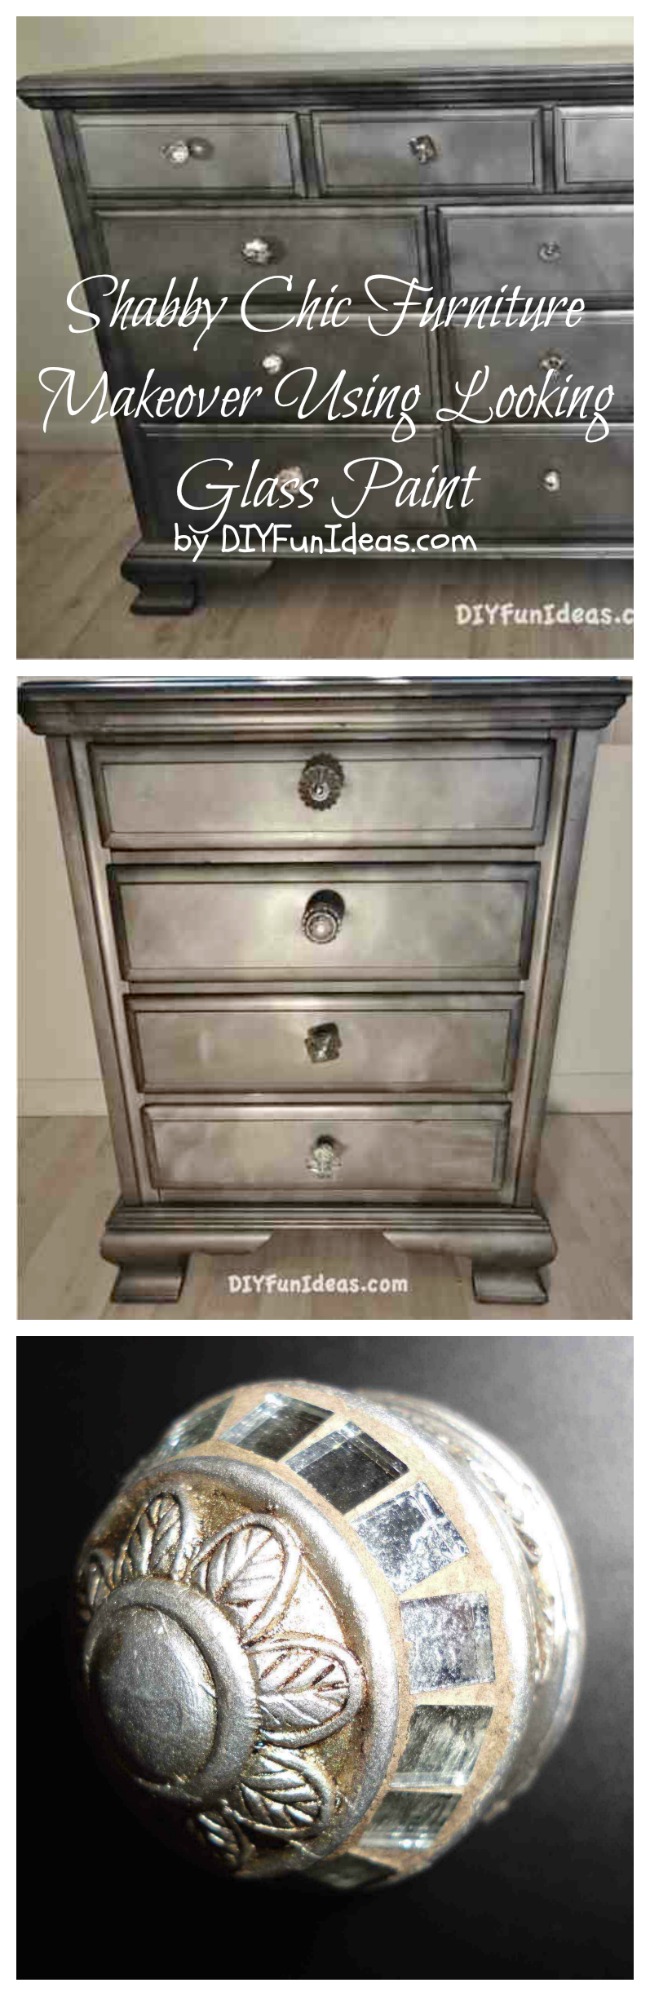 diy shabby chic furniture makeover with Looking Glass Paint